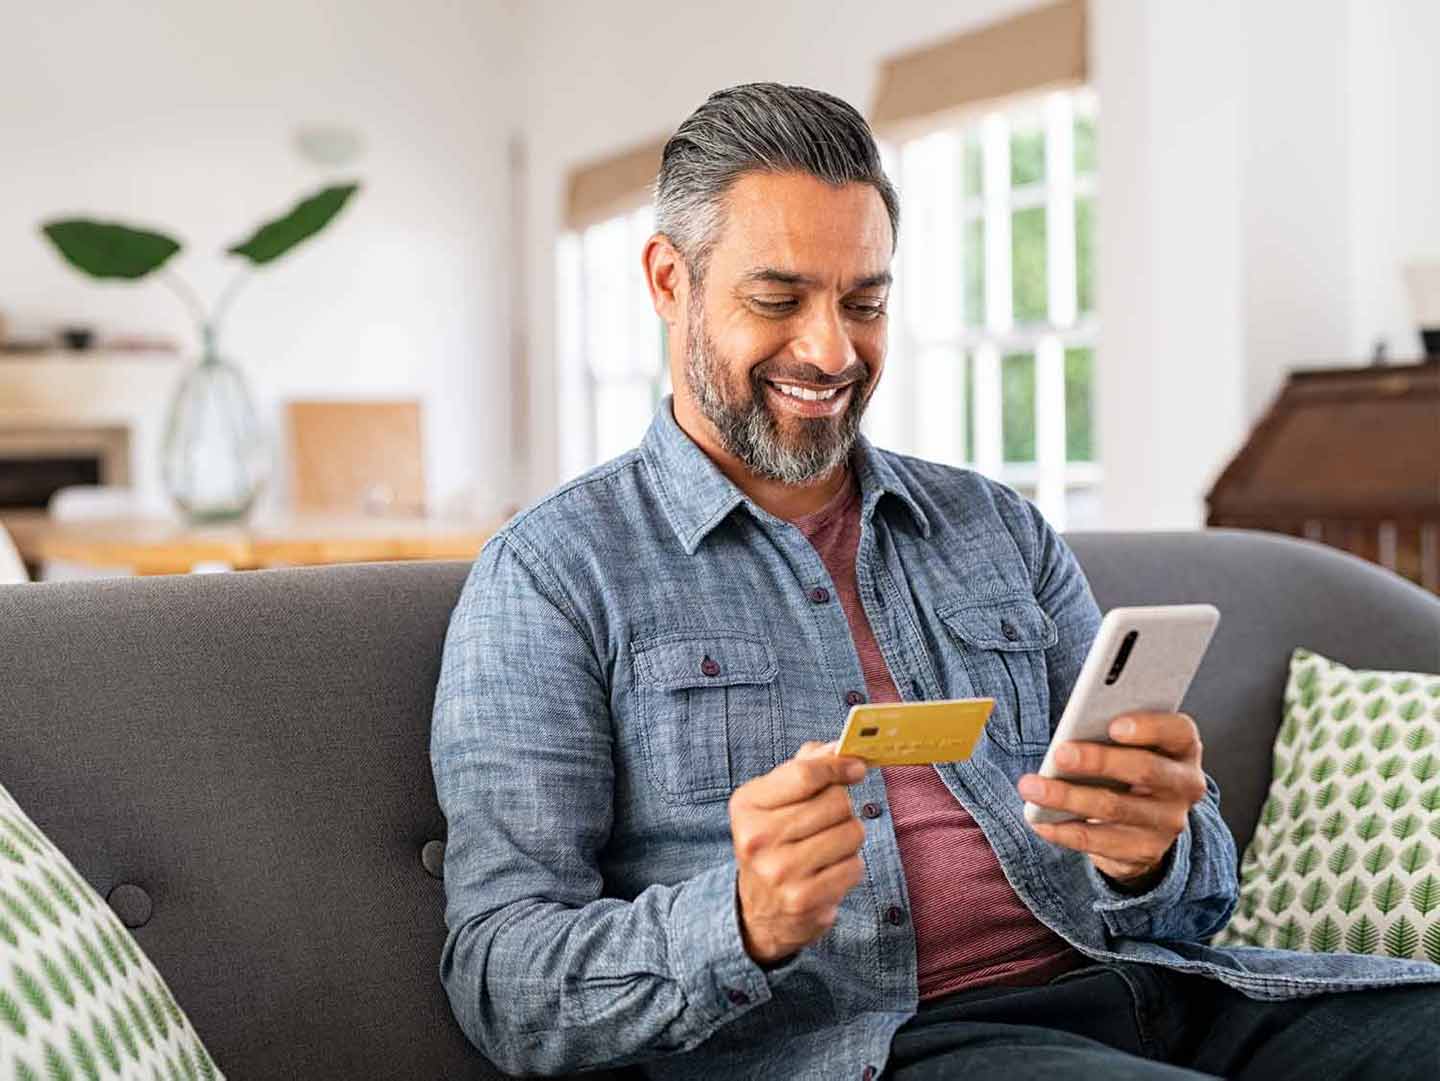 smiling man paying online with a credit card and mobile phone